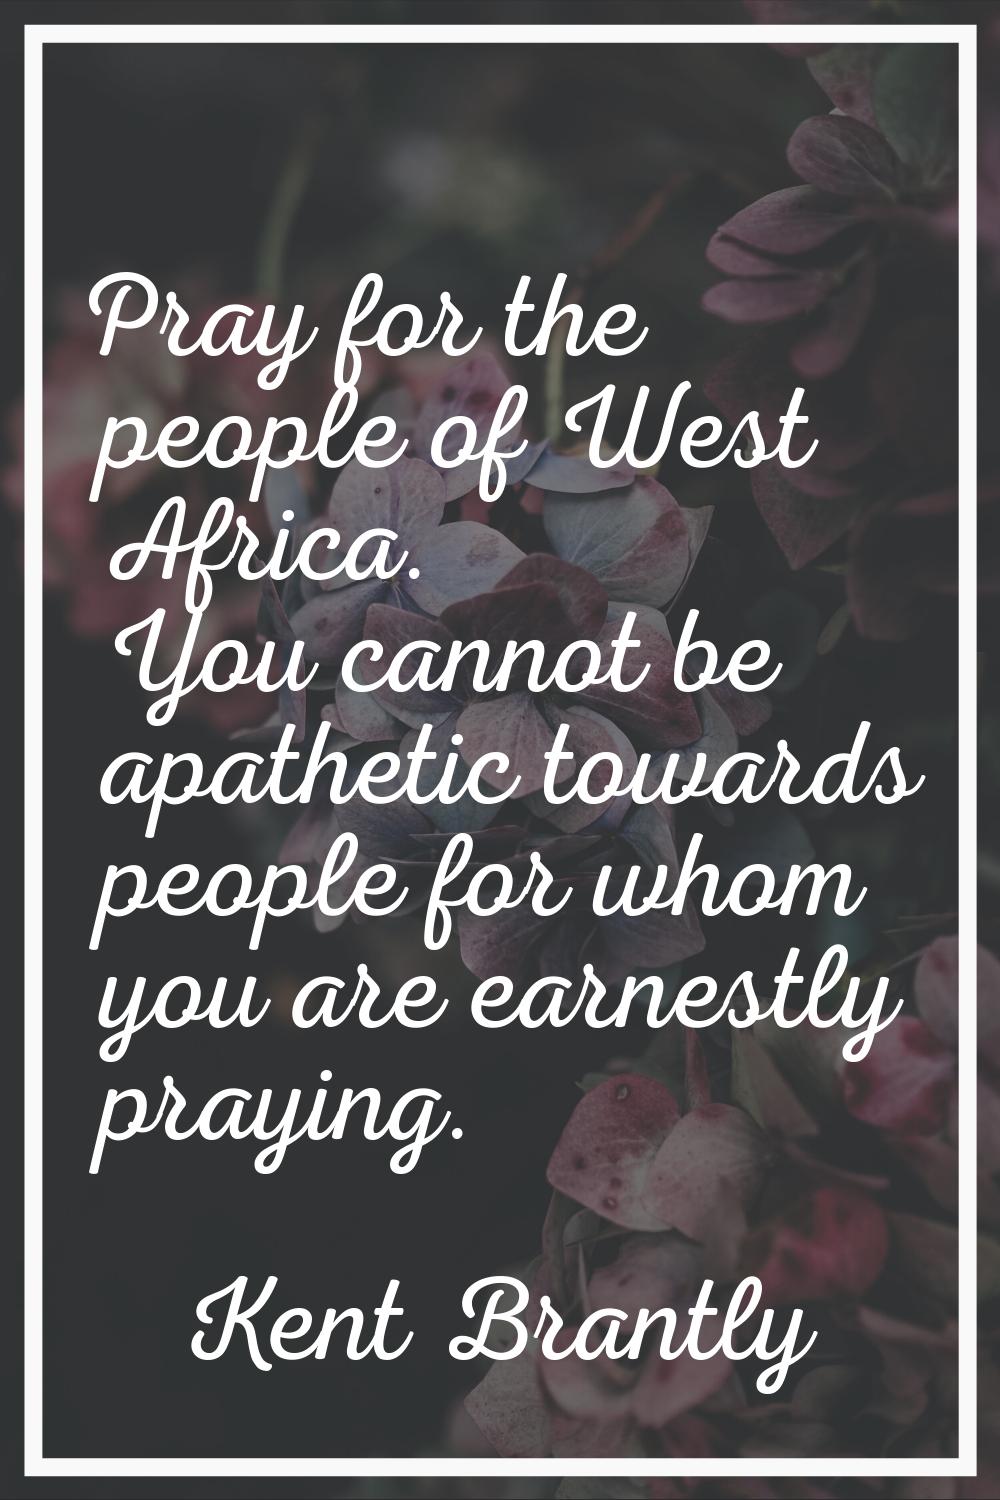 Pray for the people of West Africa. You cannot be apathetic towards people for whom you are earnest